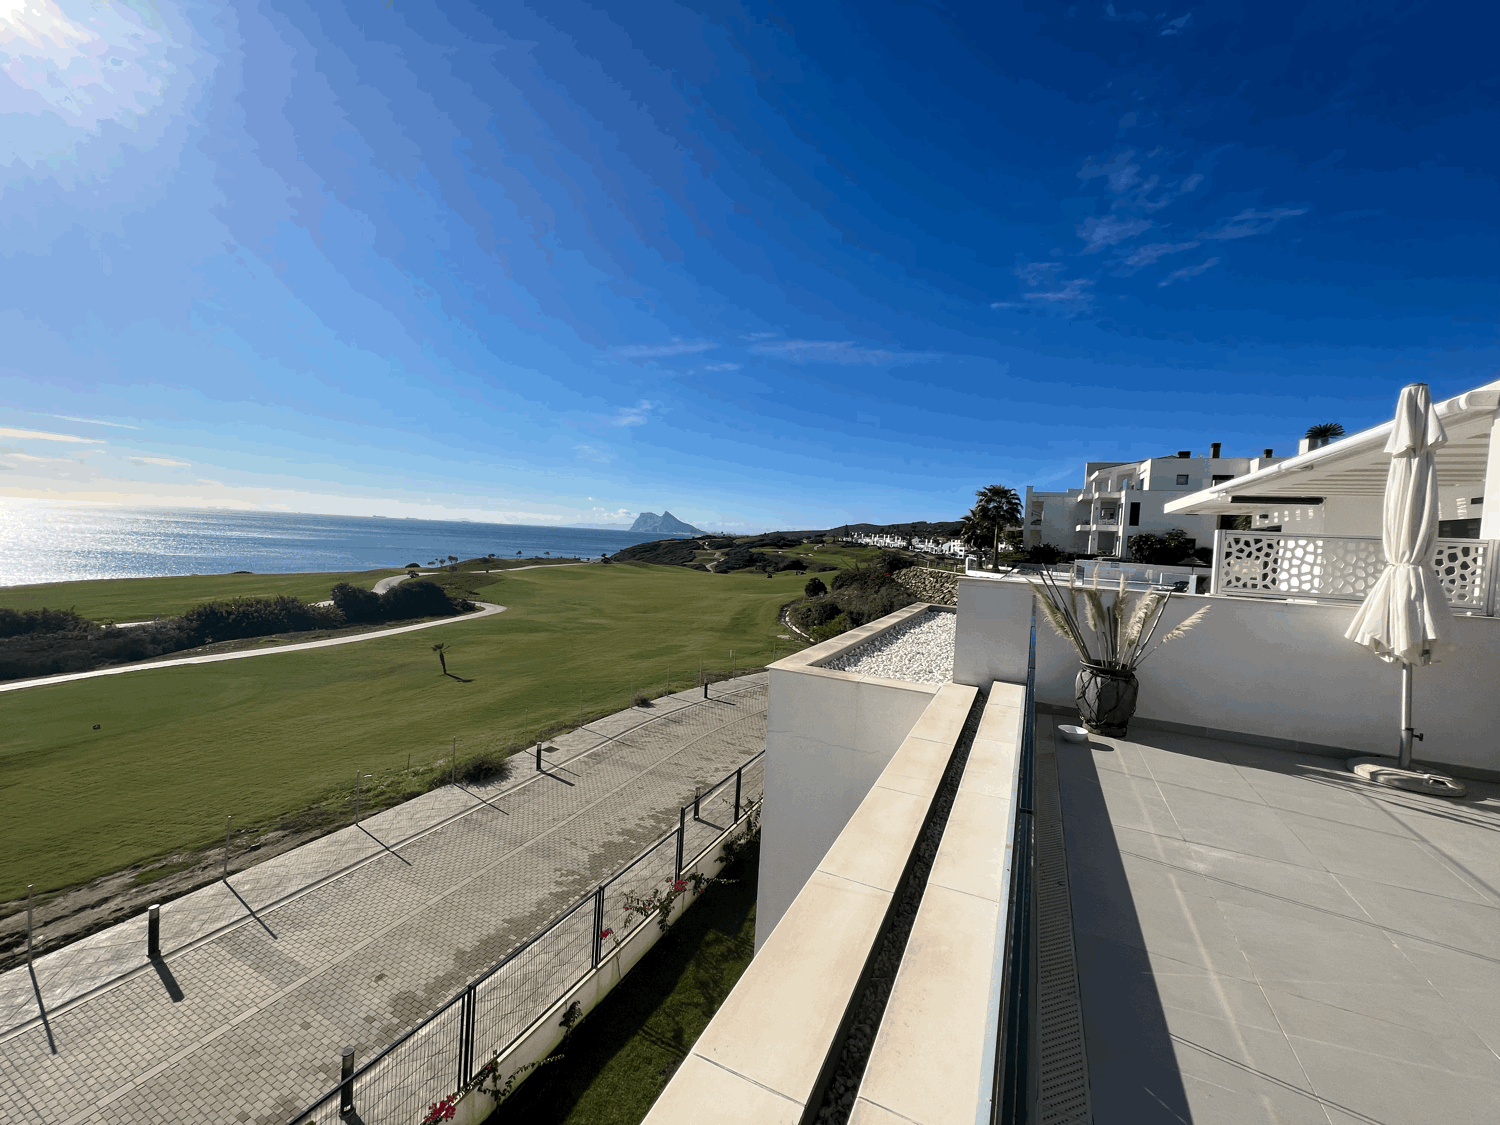 Spectacular penthouse with fabulous panoramic views of the sea, Gibraltar and Faro Carboneras